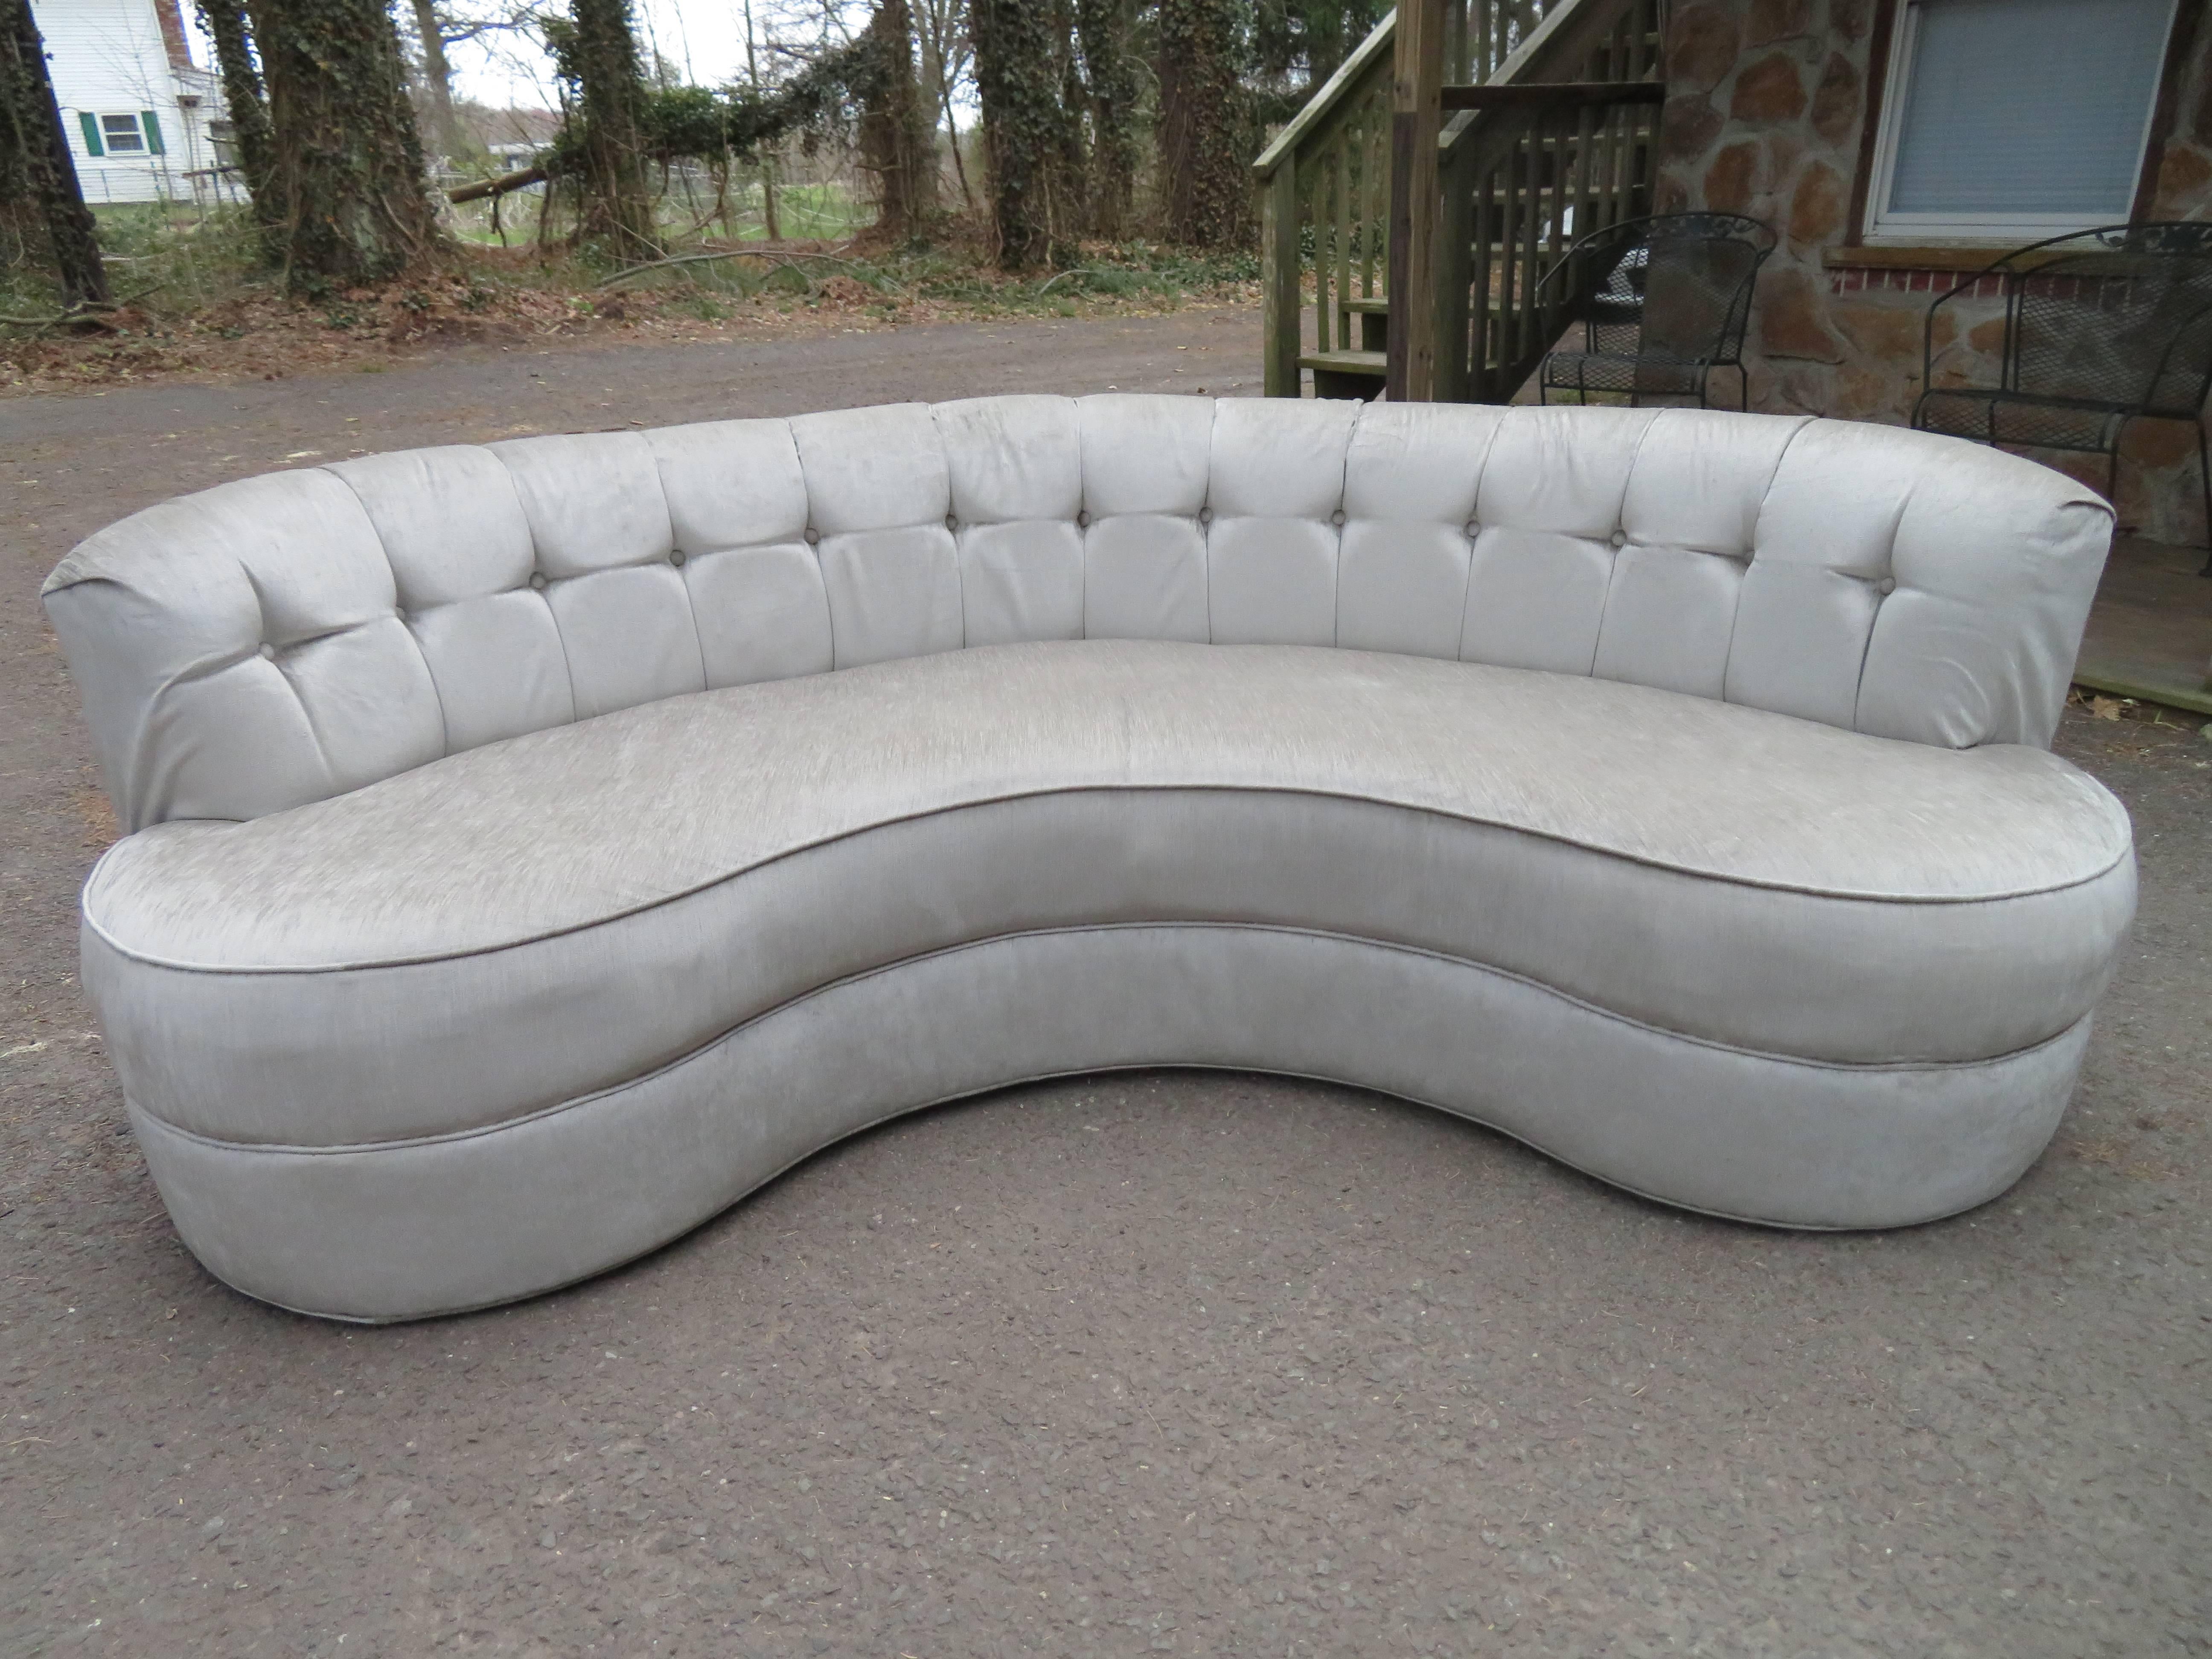 Fabulous Pair of tufted back curved kidney shaped sofas. This pair was re-upholstered about 5 years ago with a gorgeous taupe grey velvet which still looks great.